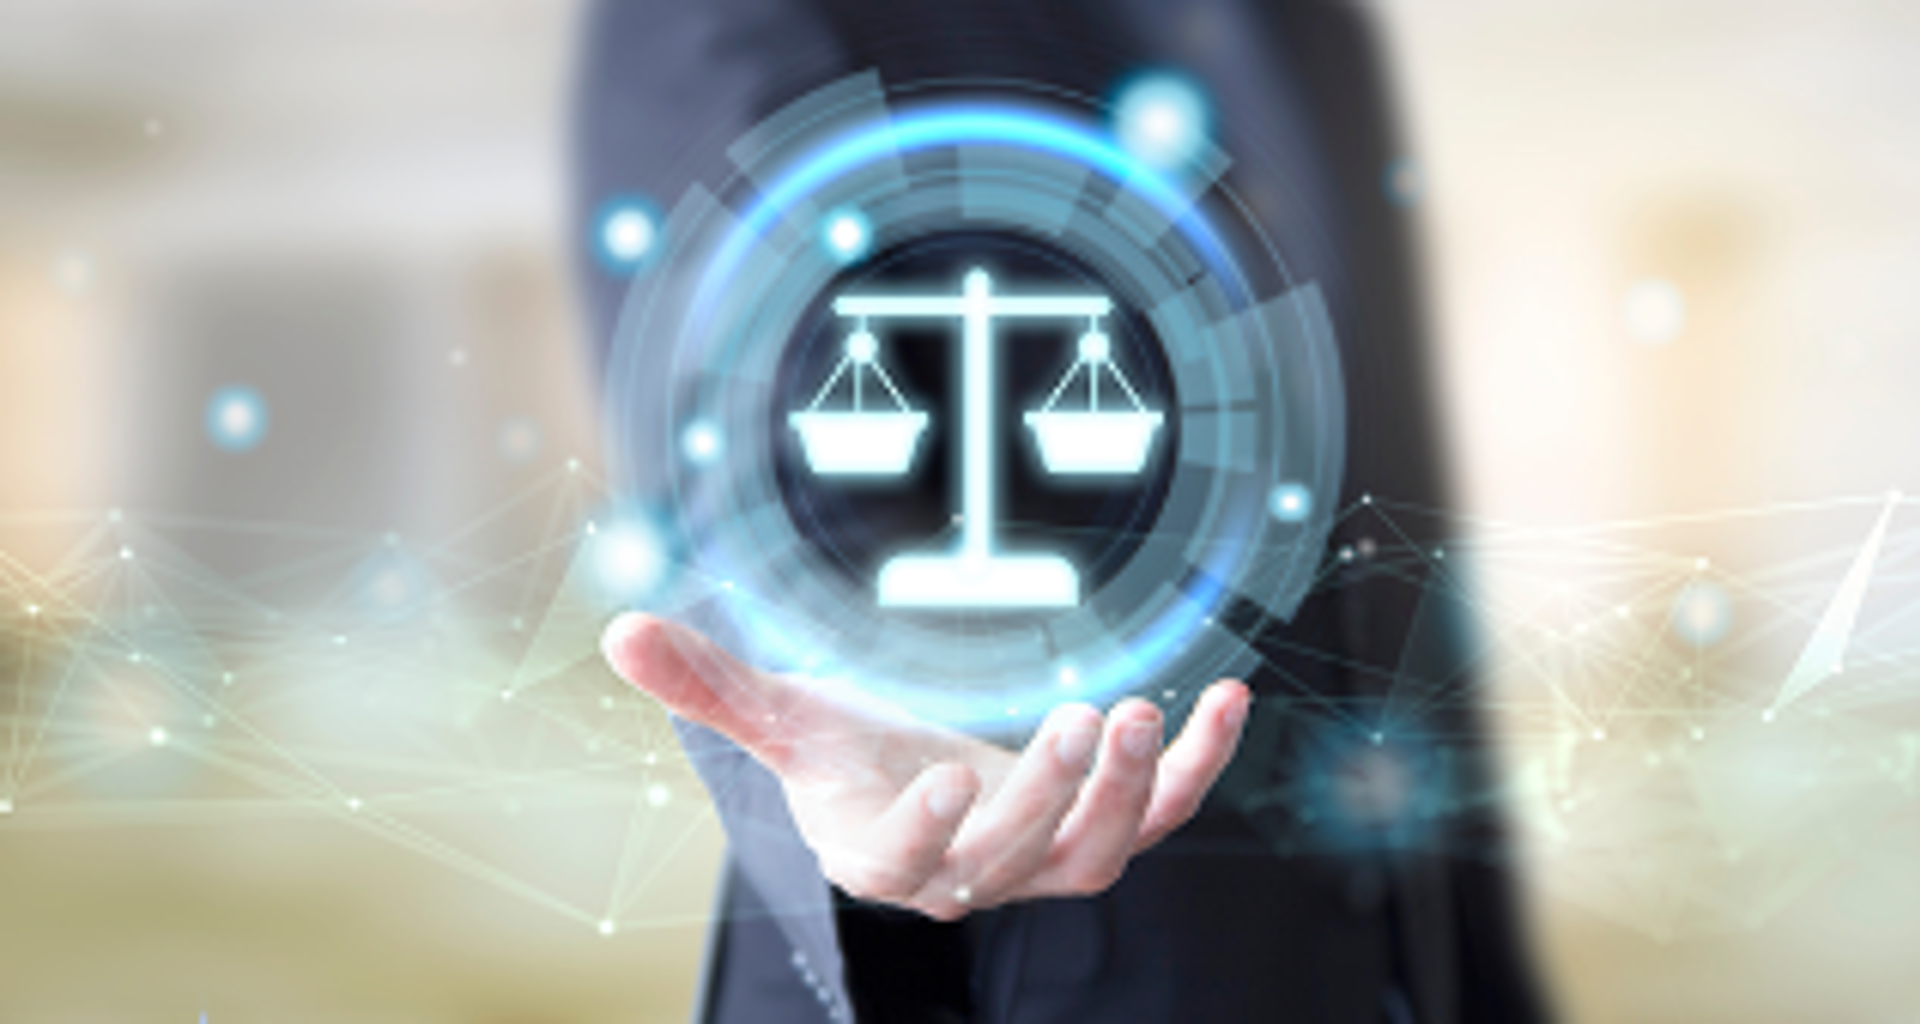 Working successfully in a hybrid legal practice